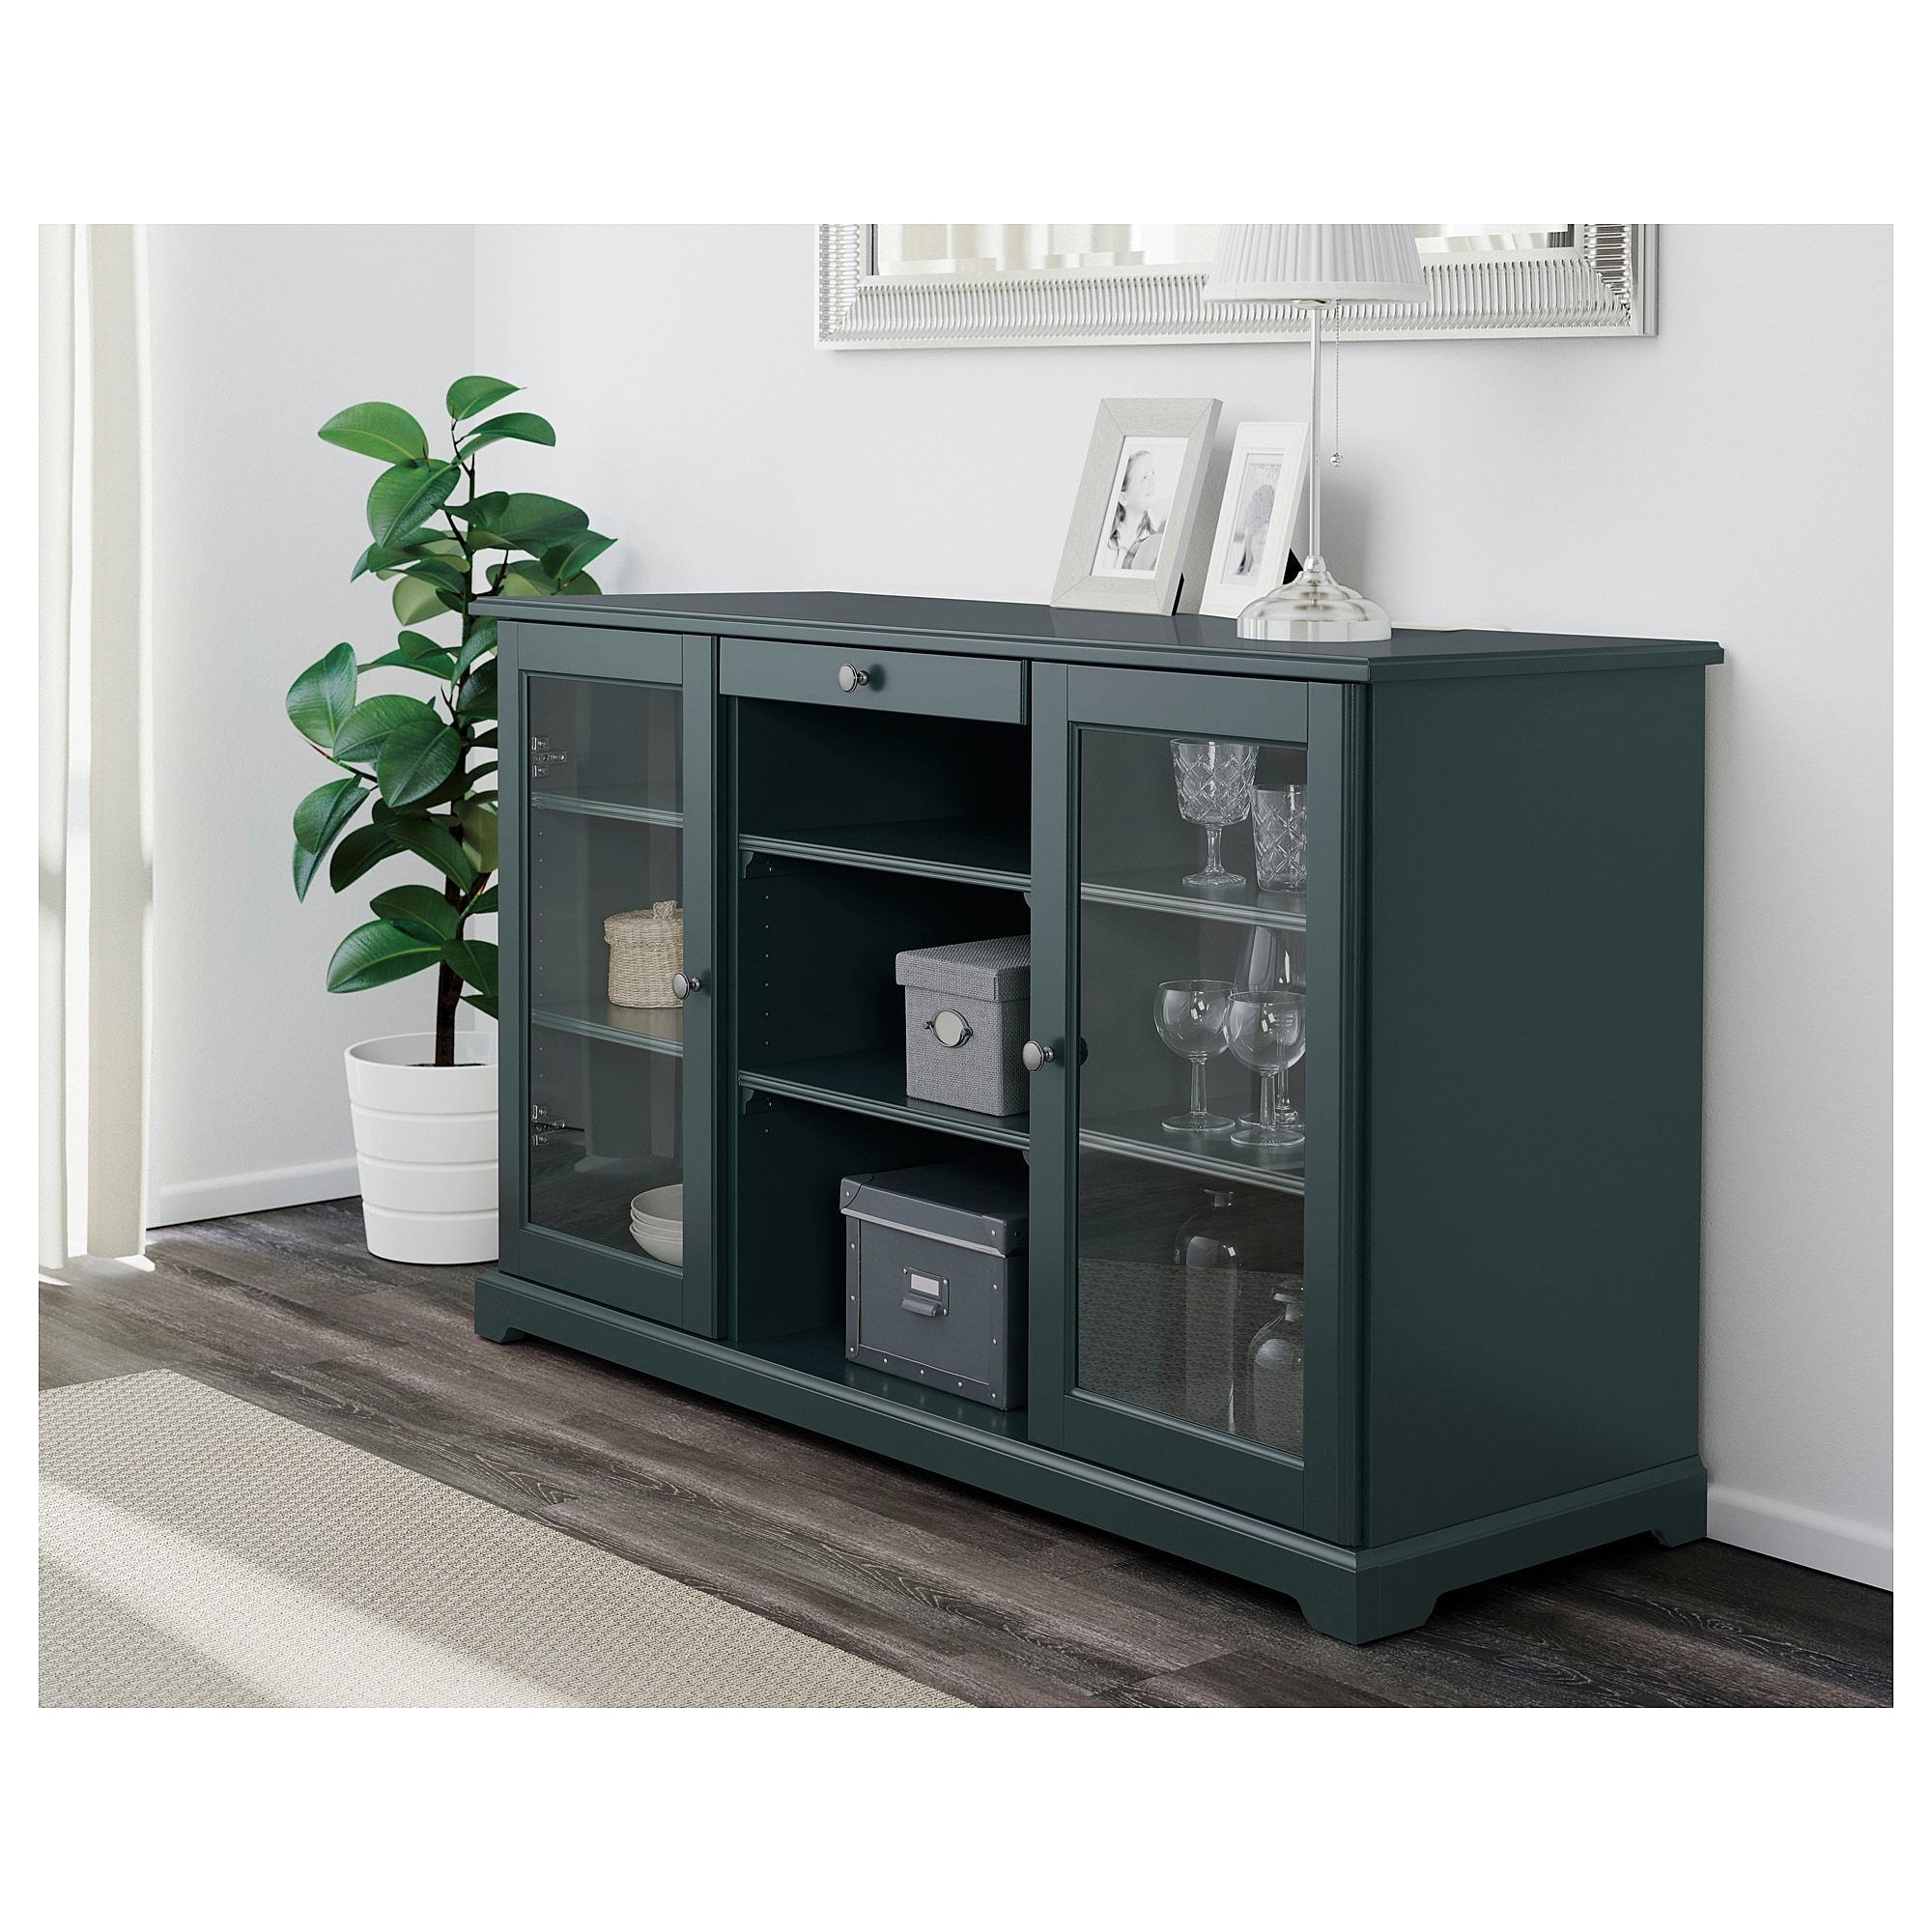 Furniture And Home Furnishings | Products In 2019 | Liatorp Throughout Mauldin Sideboards (View 25 of 30)